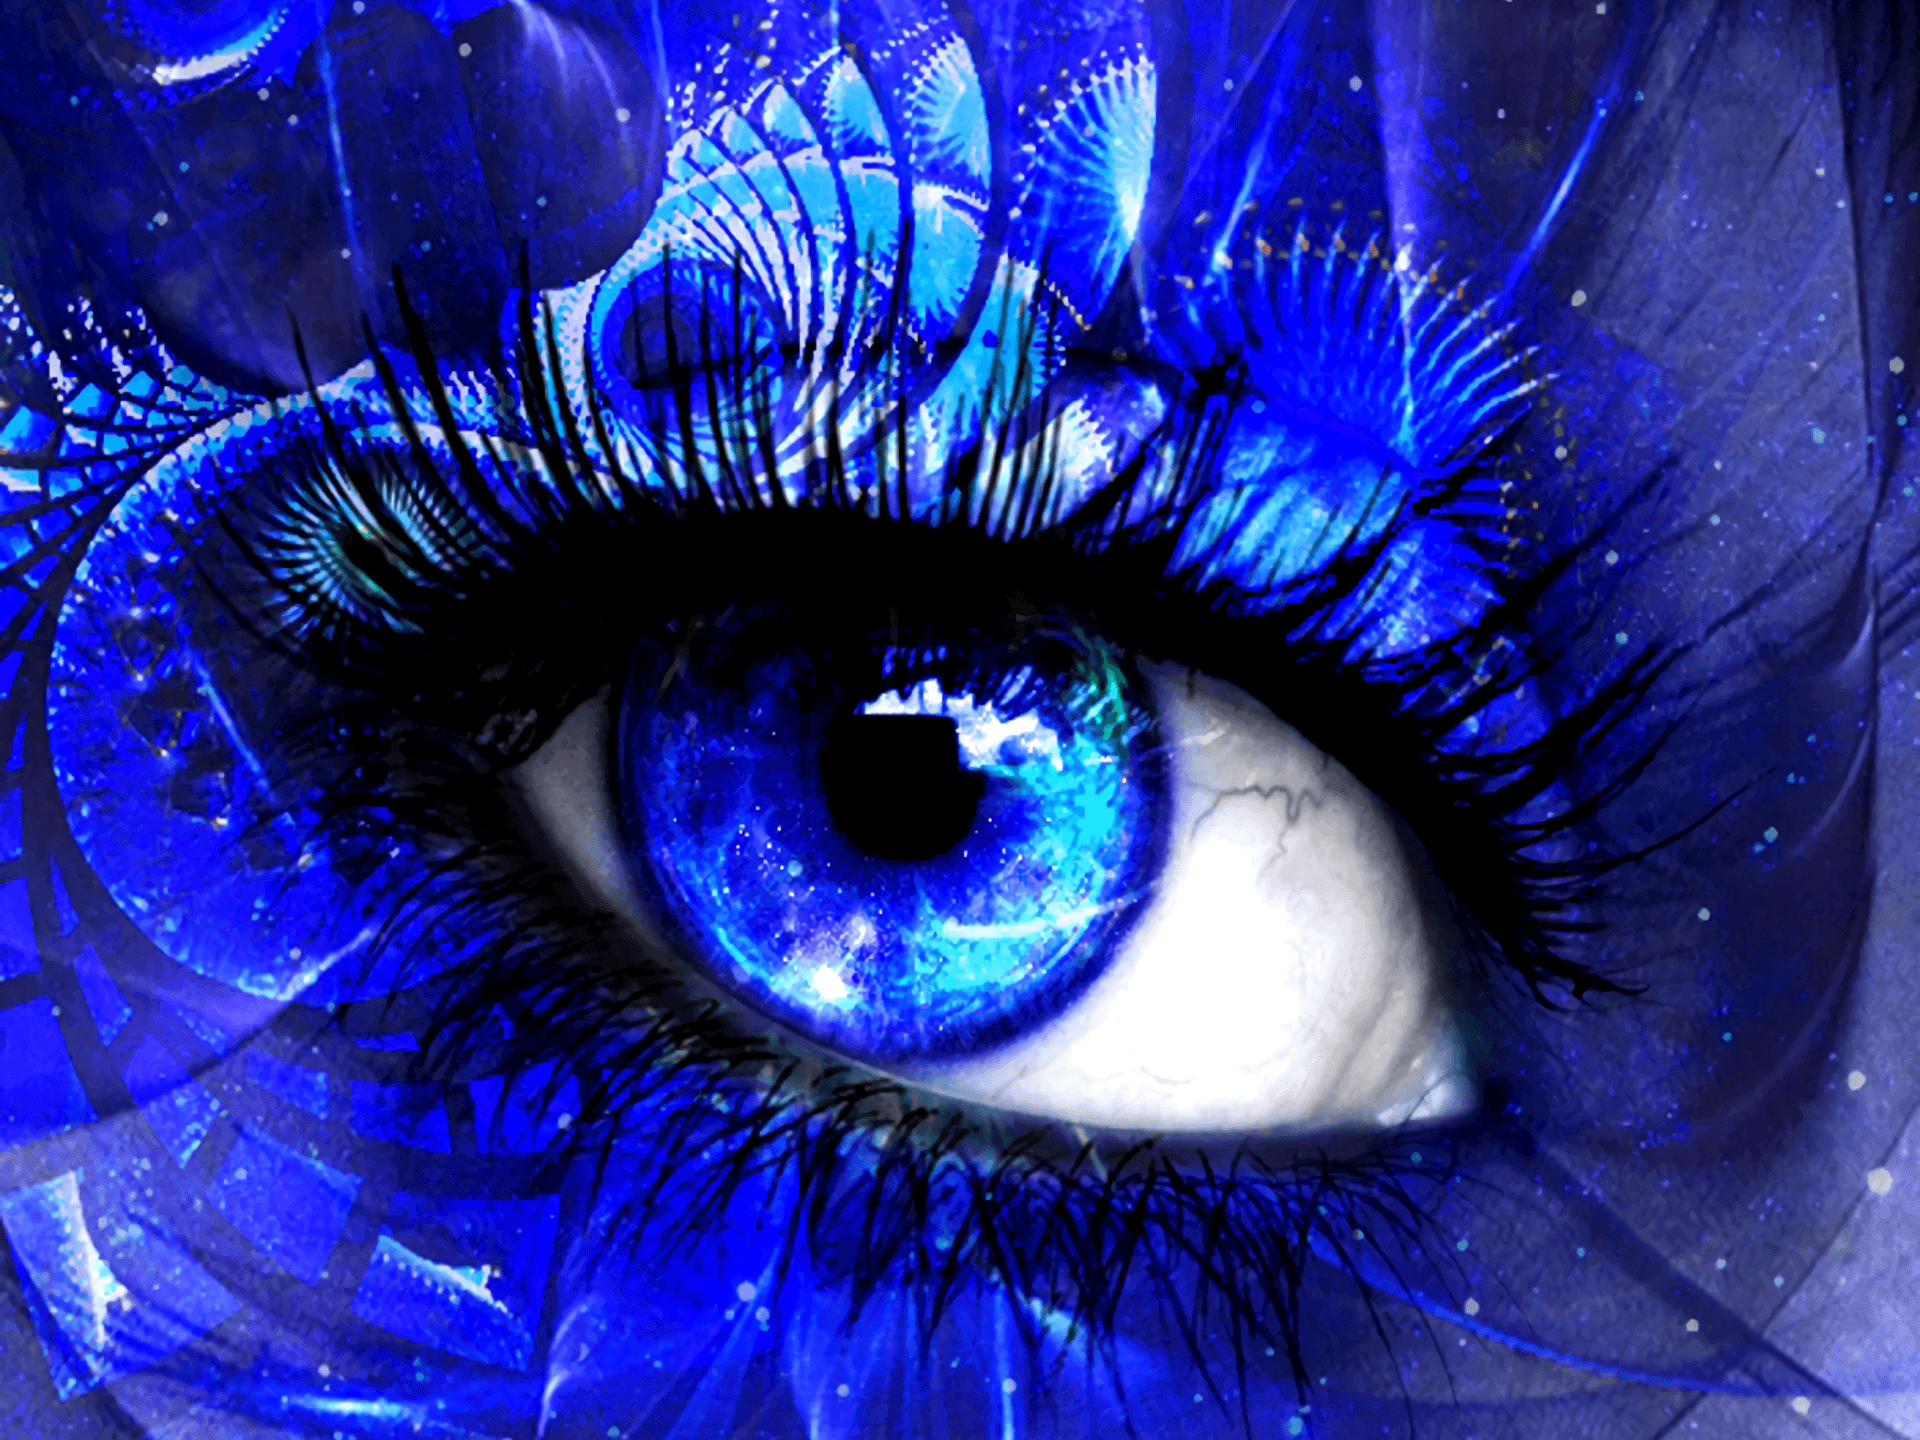 An Eye With Blue And White Swirls